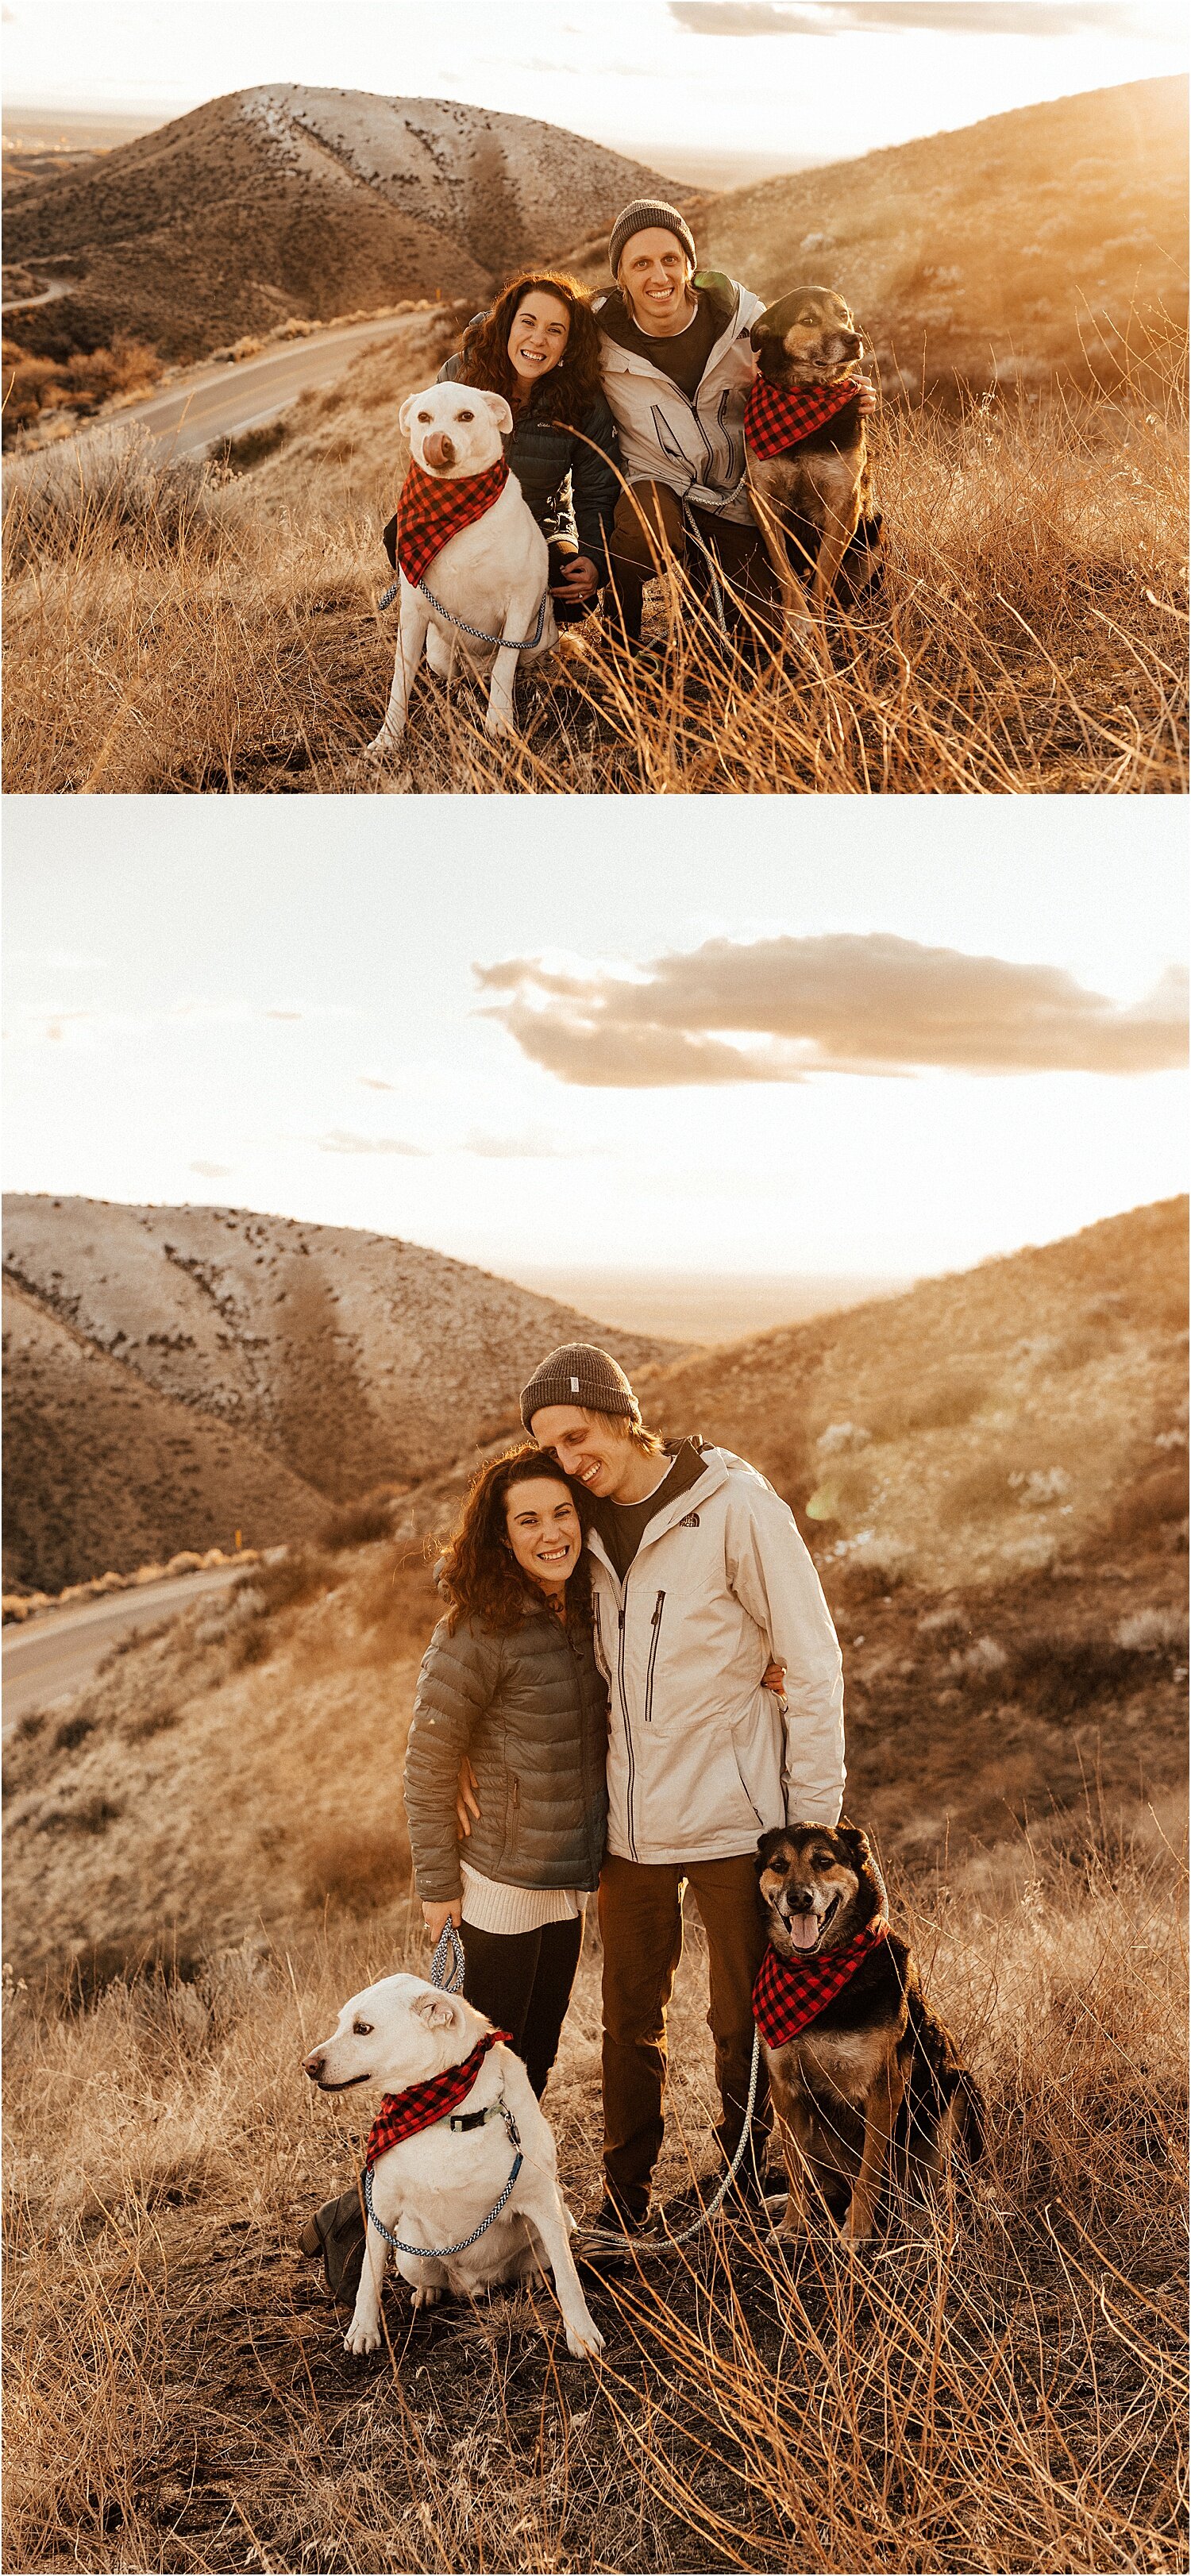 brewery foothills winter engagement session boise idaho5.jpg